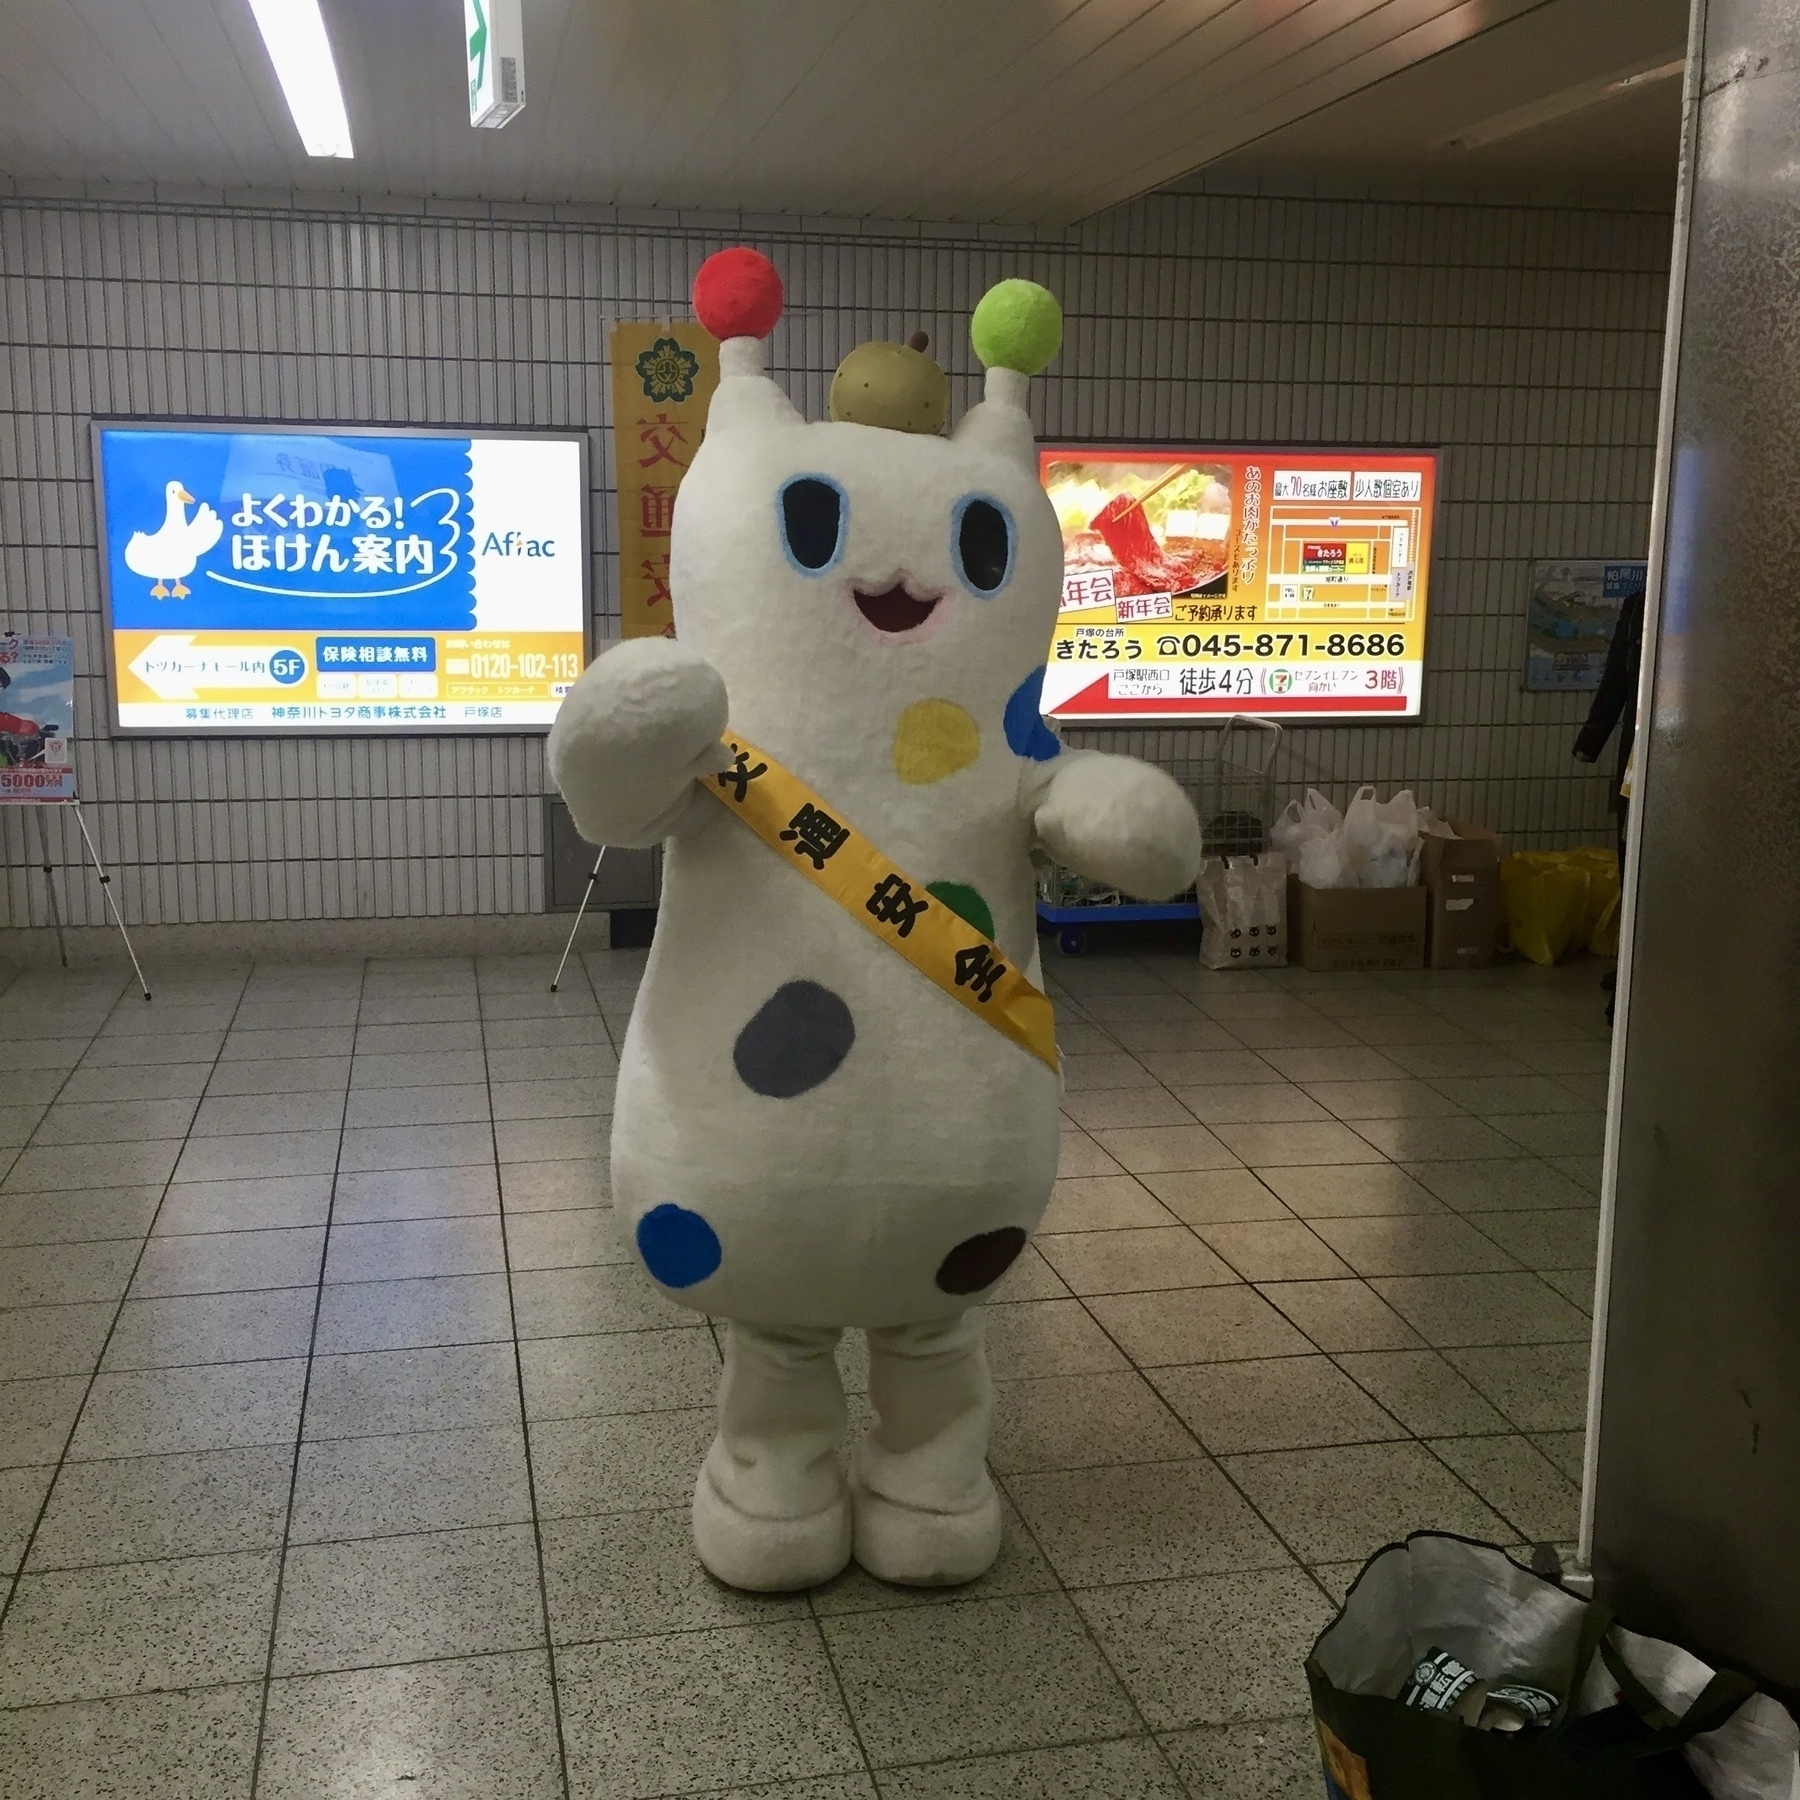 A person in a mascot suit, with polka dots in green, blue, and yellow, and antennae, has a sash with “koutsu anzen” (traffic safety) written on it. 